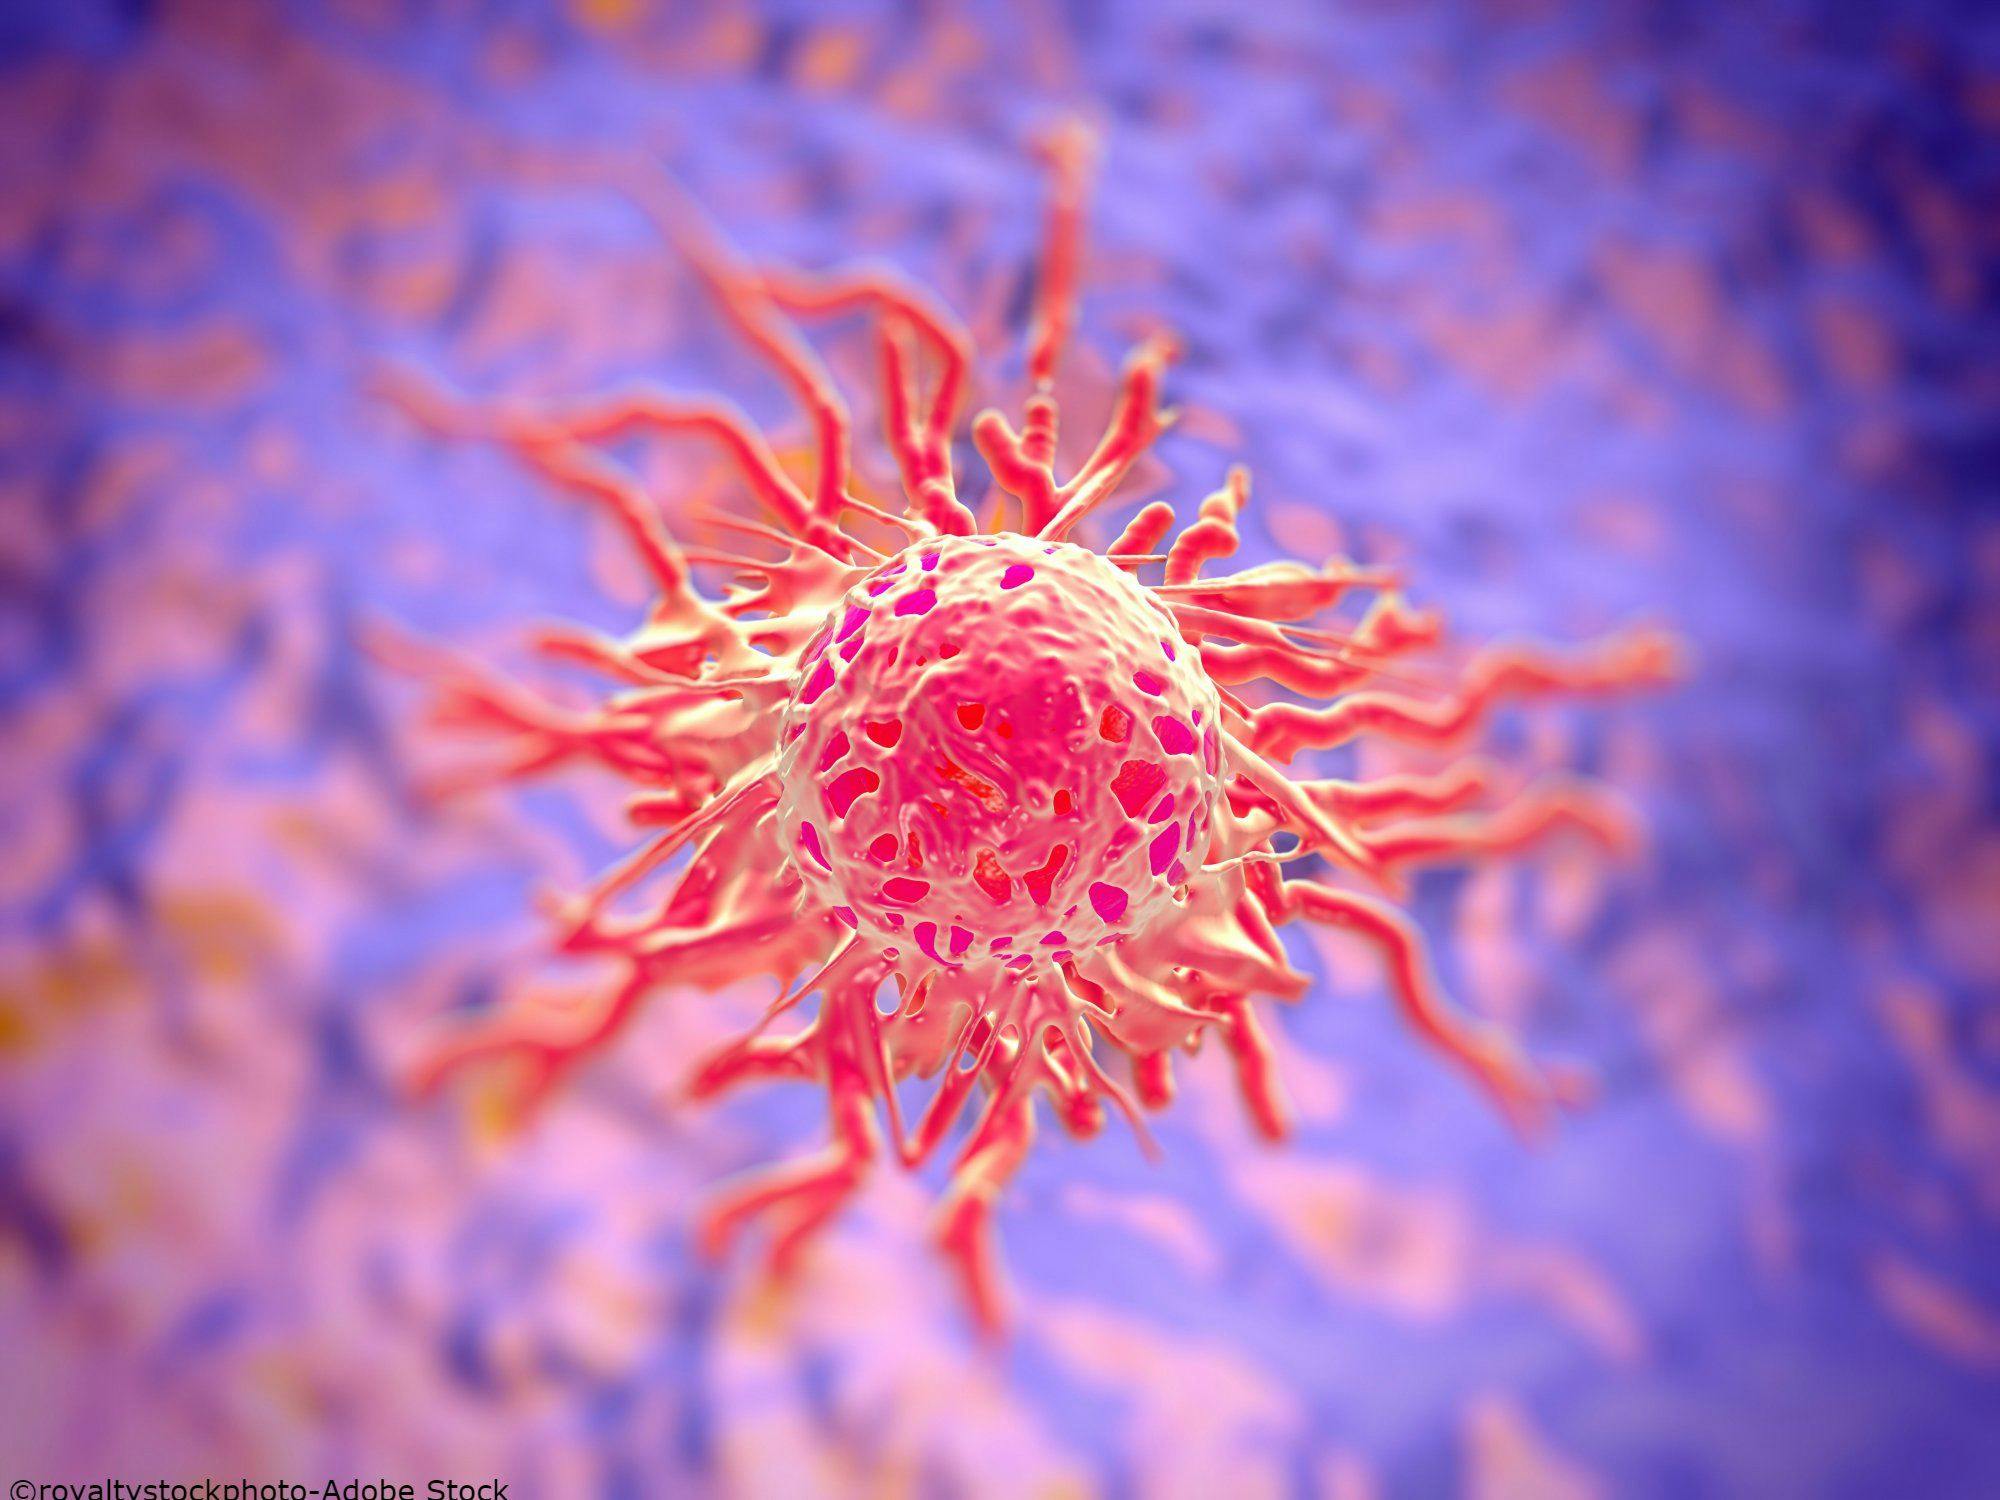 HPV Gene Expression Signatures, Prognosis in Cervical Cancers